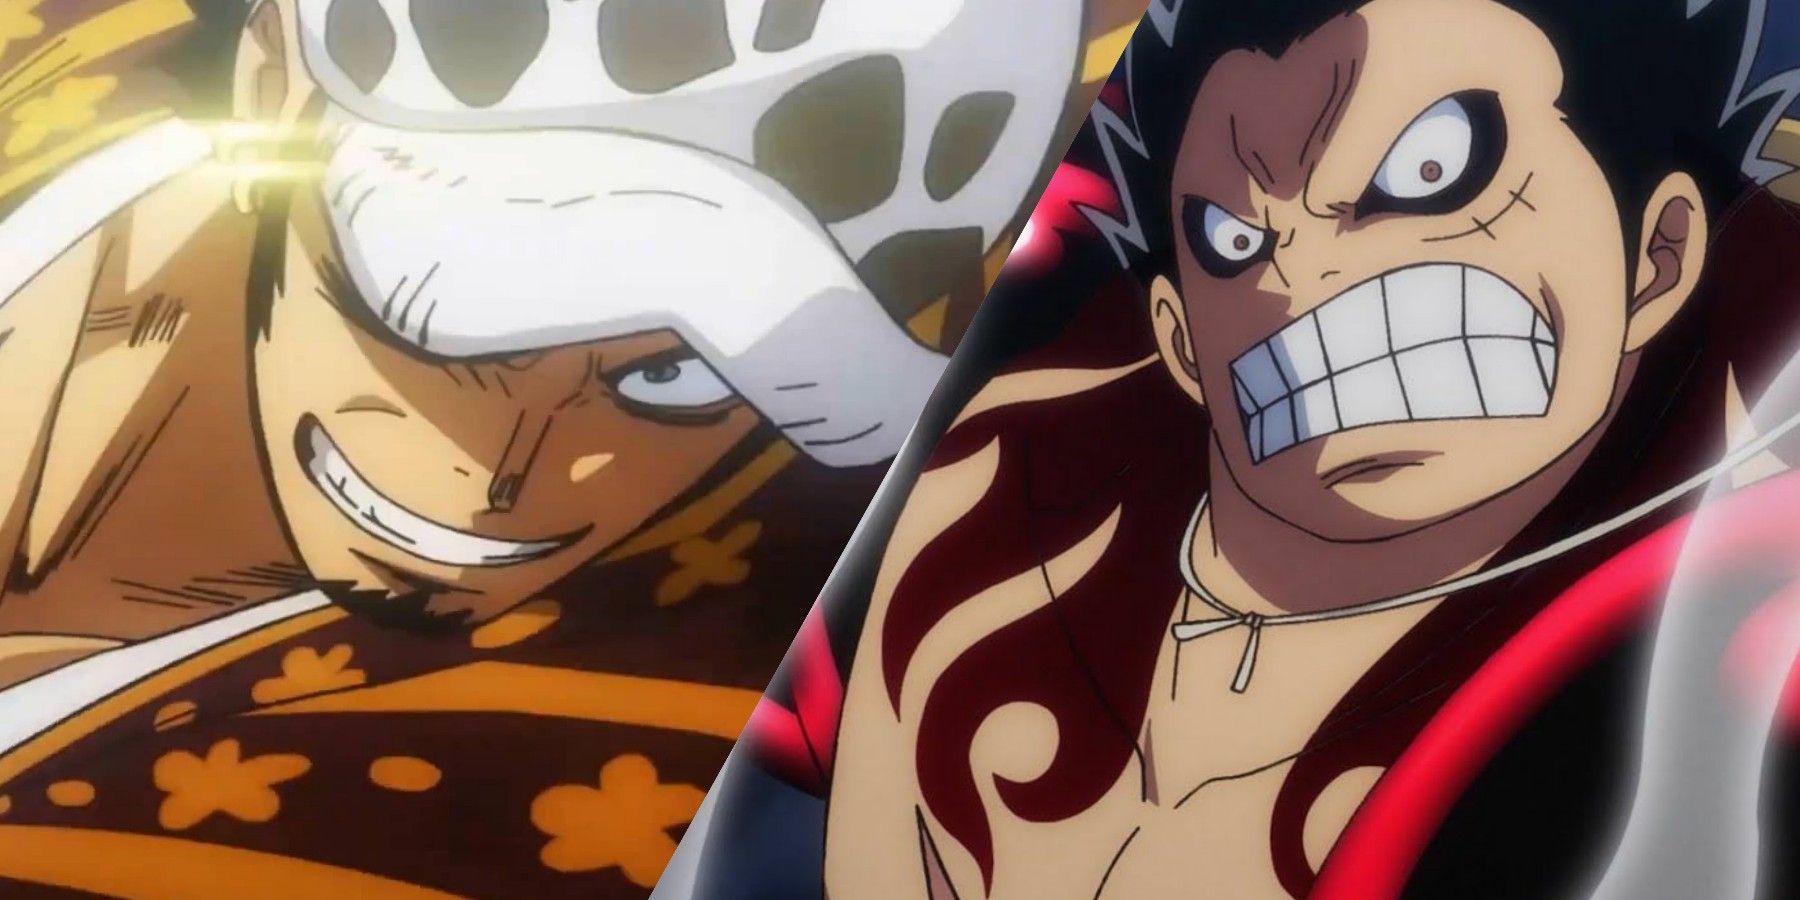 What is the most powerful Devil Fruit in One Piece and why is it Gomu Gomu  no Mi? - Quora